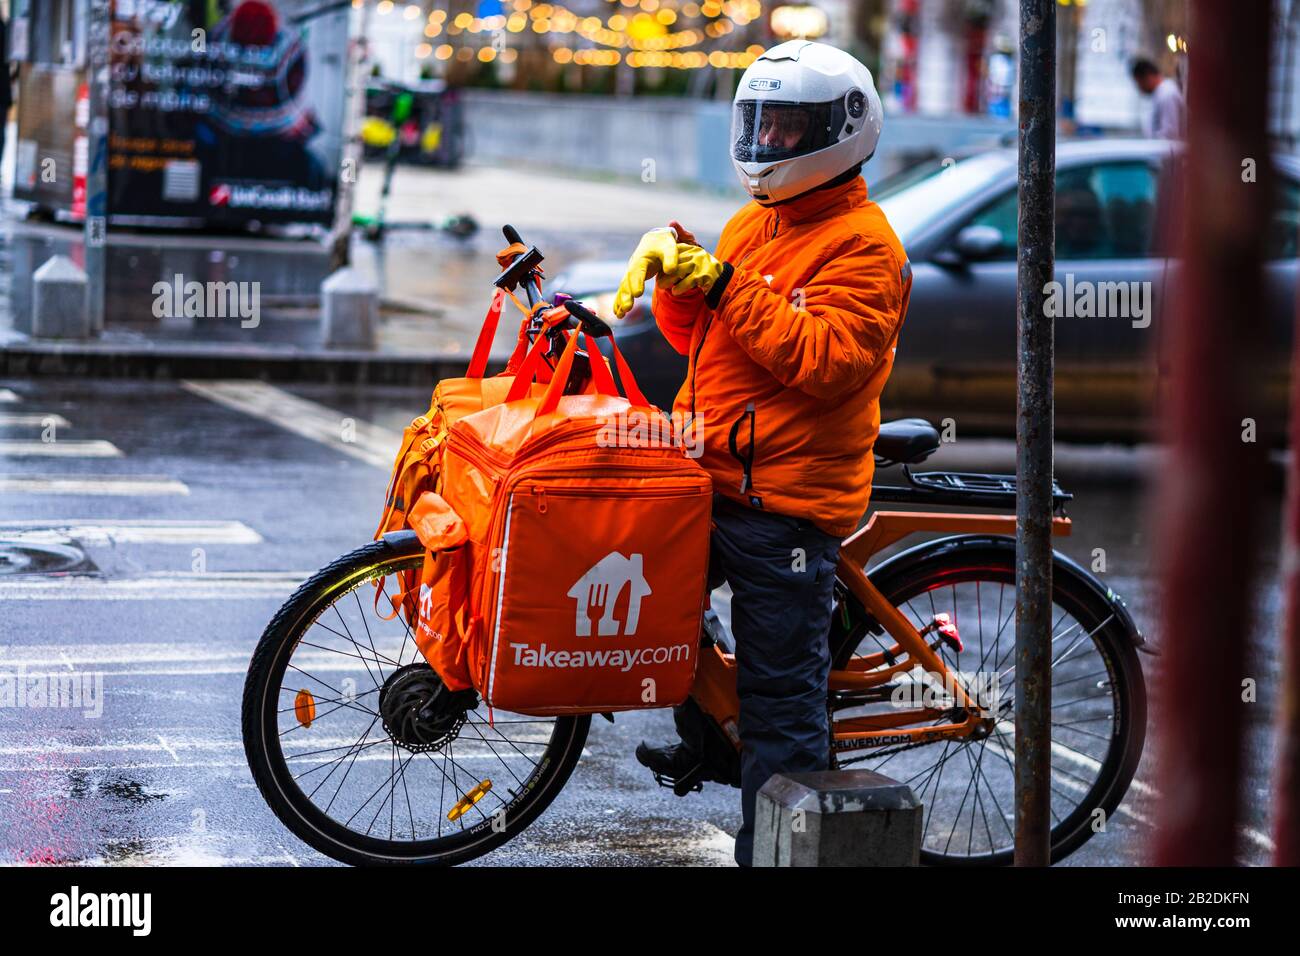 Young man on an electric bike with takeaway.com logo delivering food during a rainy day in Bucharest, Romania, 2020 Stock Photo